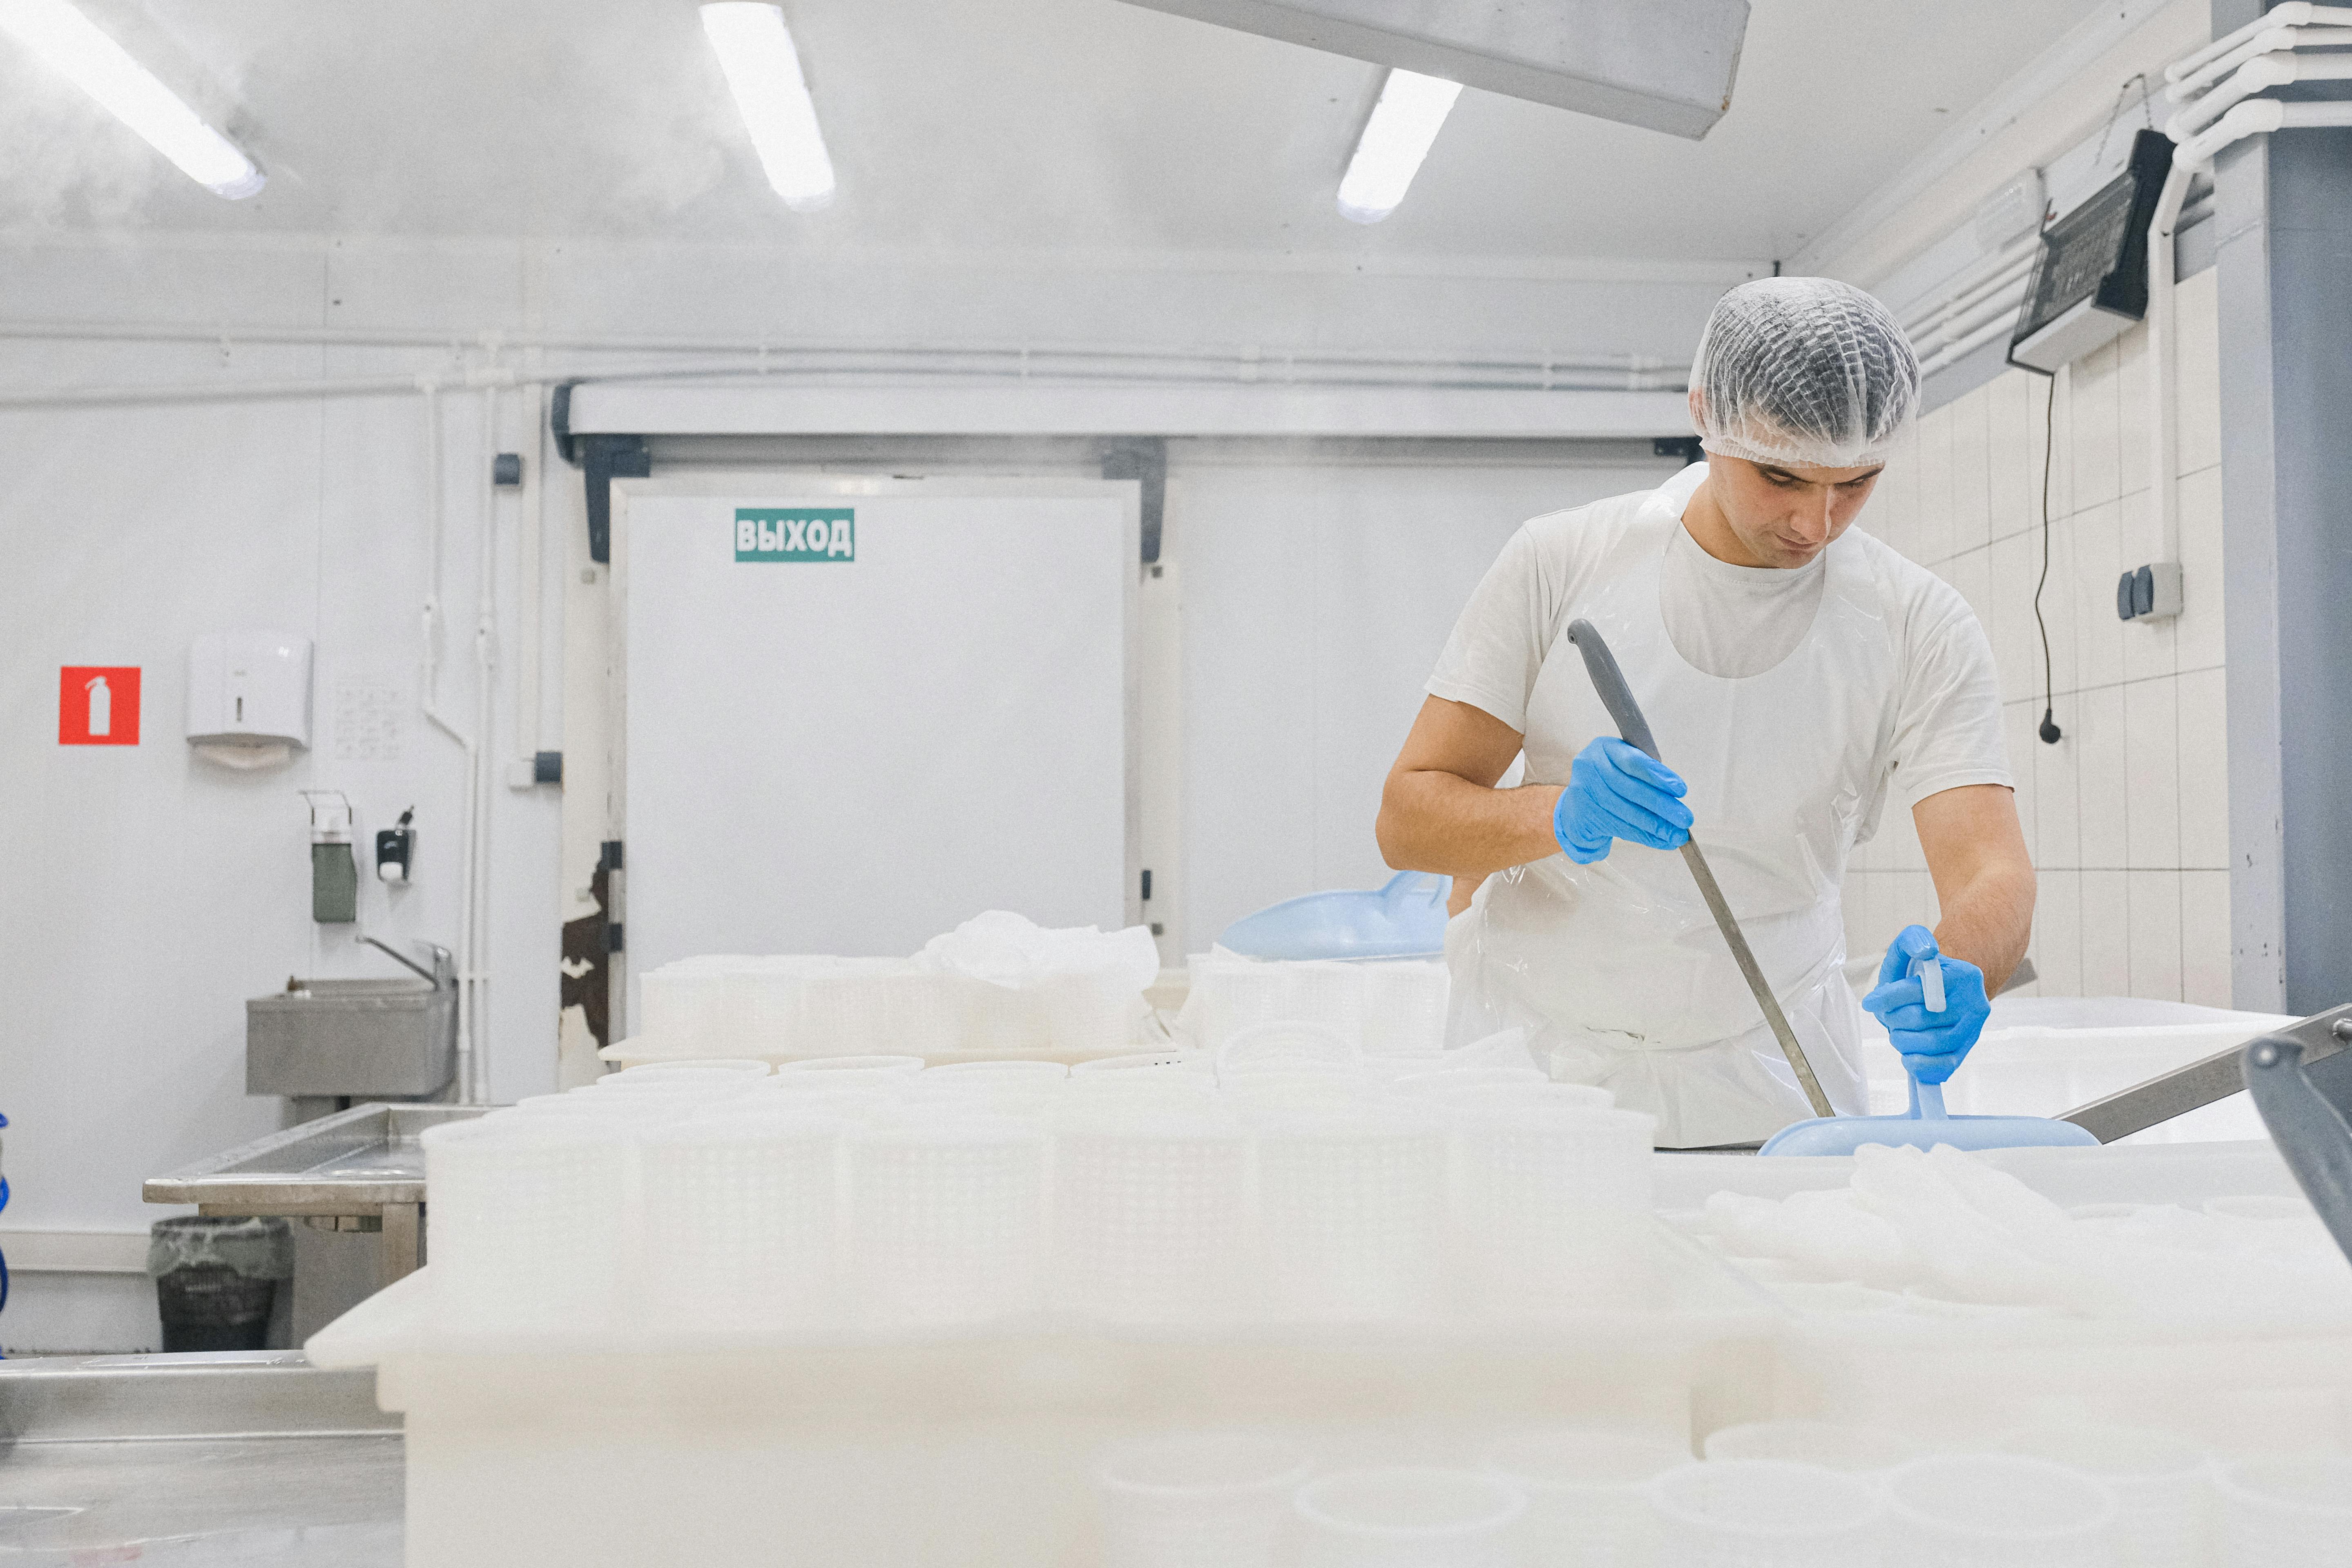 A man working at a cheese factory | Source: Pexels